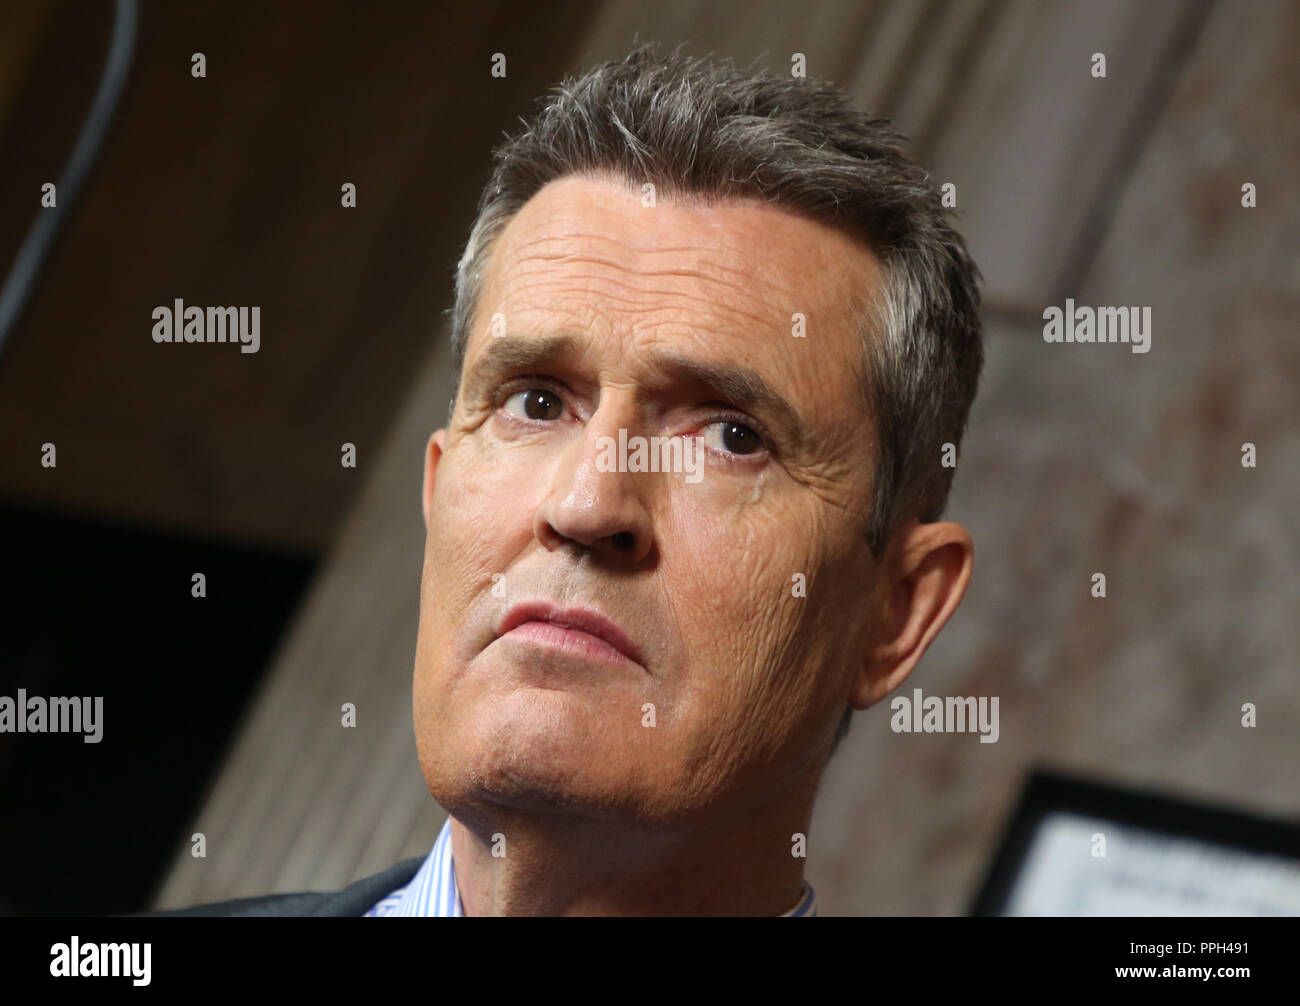 Beverly Hills, California, USA. 25th Sep, 2018. Rupert Everett, at 2018 LA Film Festival - Gala Screening Of 'The Happy Prince' at Wallis Annenberg Center for the Performing Arts in Beverly Hills California on September 25, 2018. Credit: Faye Sadou/Media Punch/Alamy Live News Stock Photo